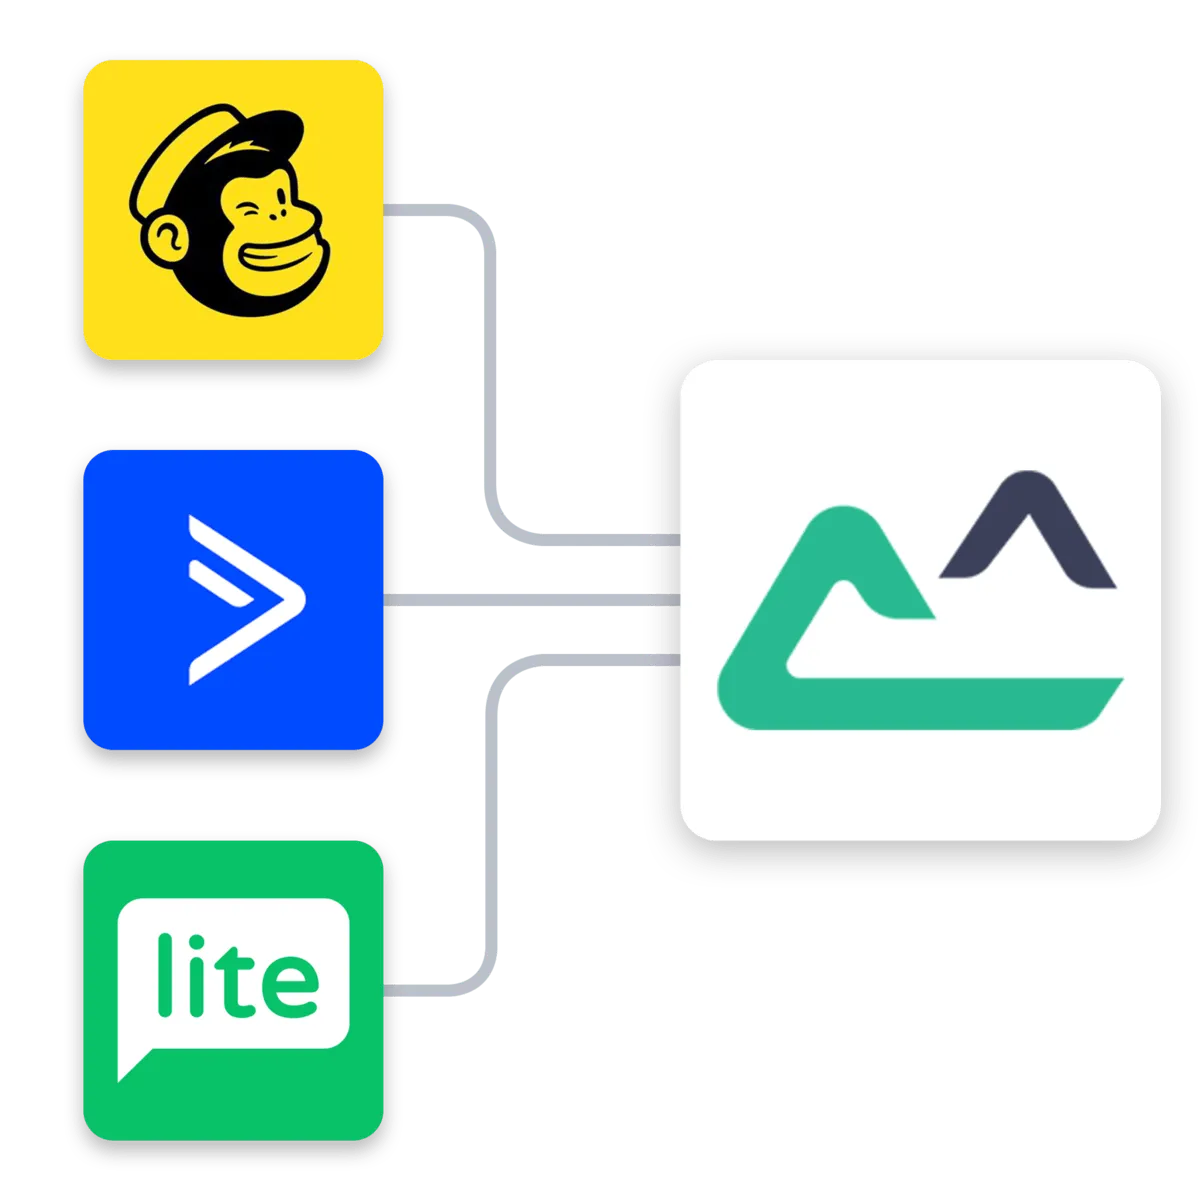 Icons of email, automation tools, and PatientBase connected by lines, symbolizing integration.